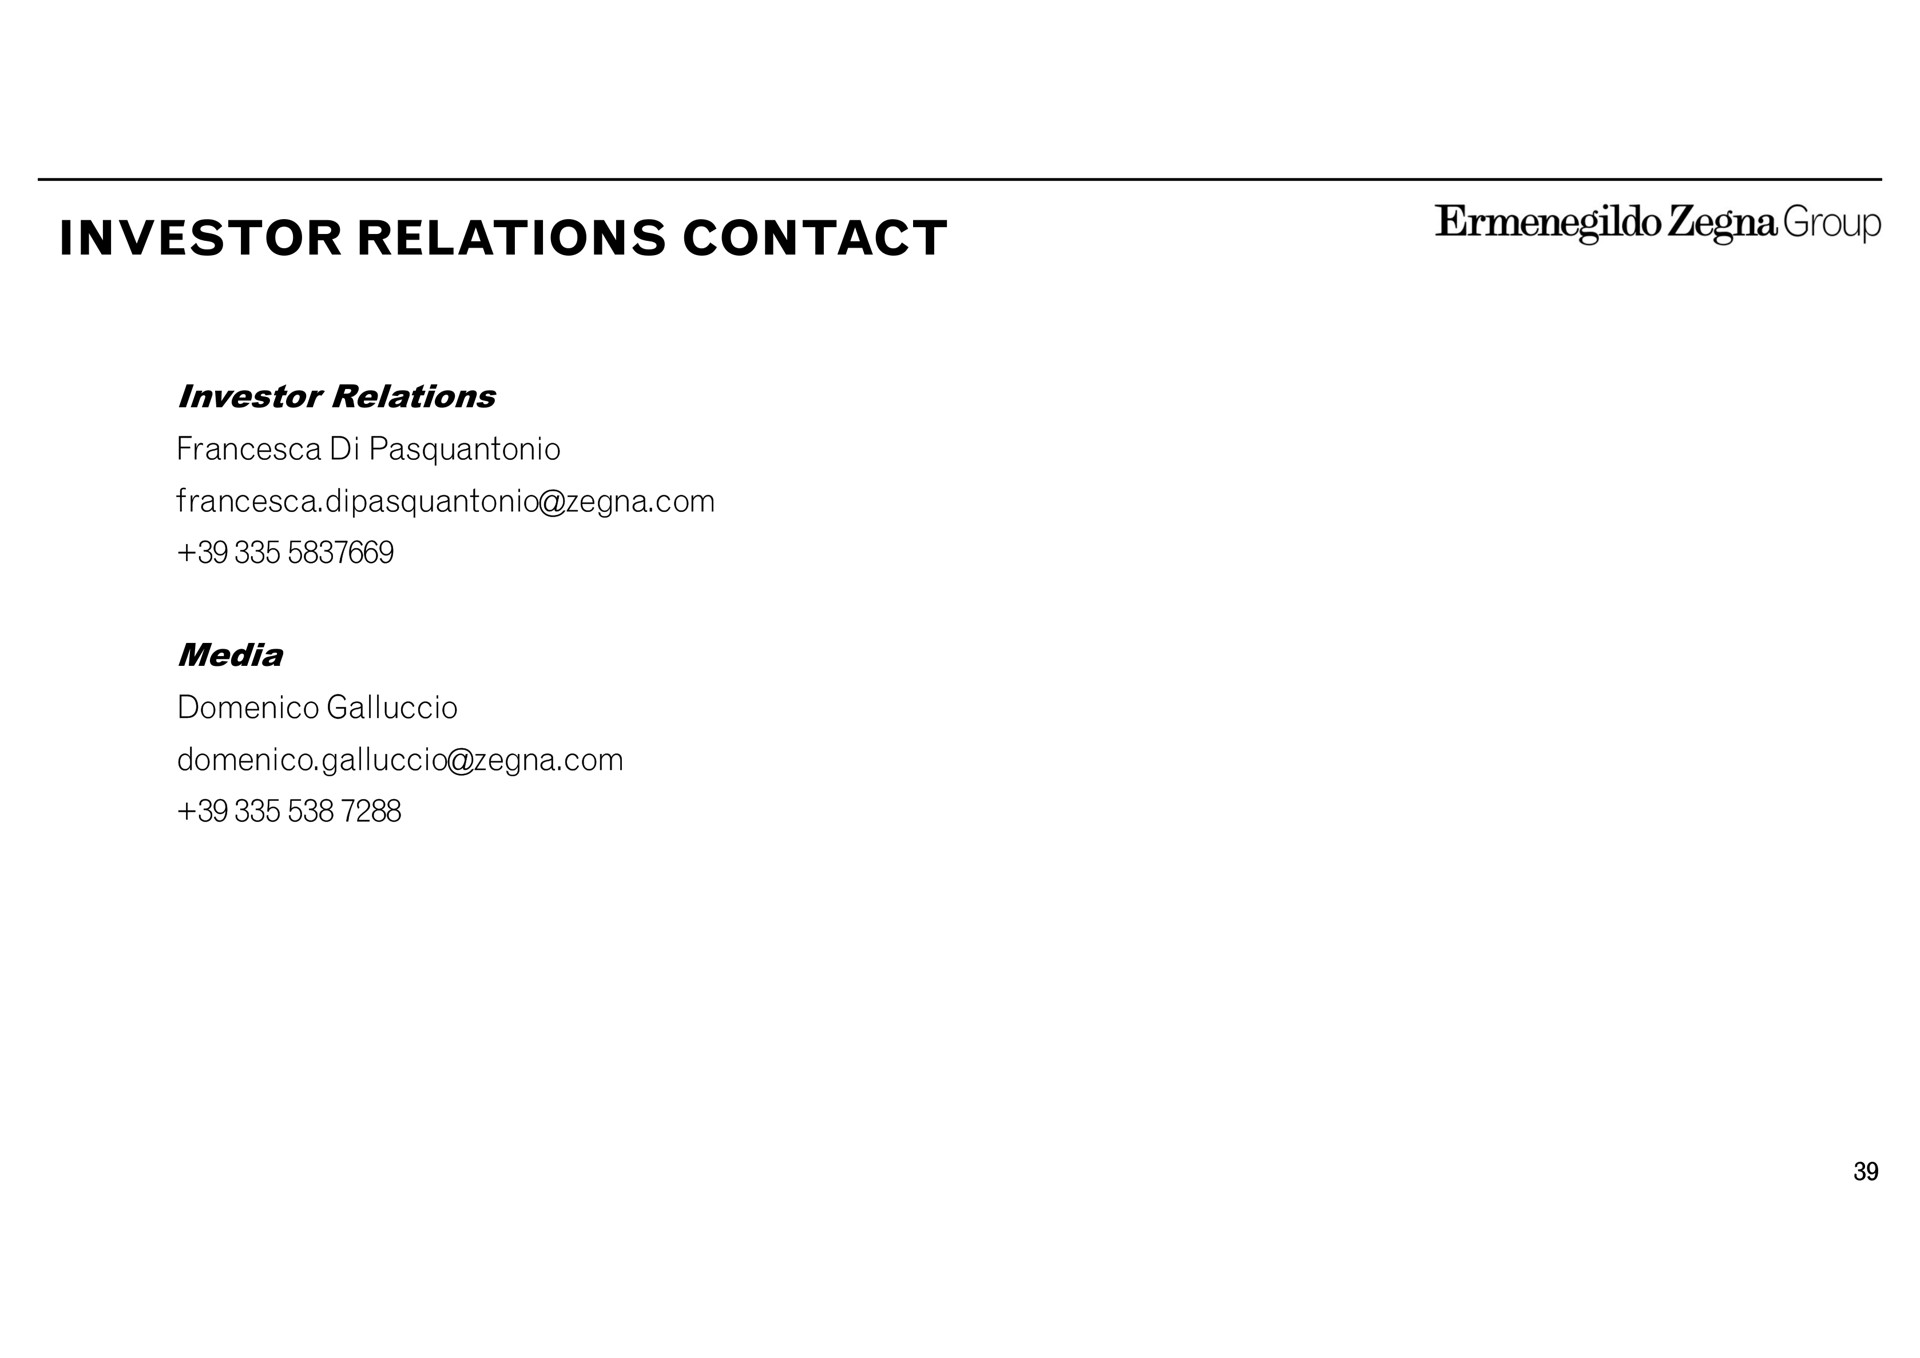 investor relations contact investor relations media group | Zegna